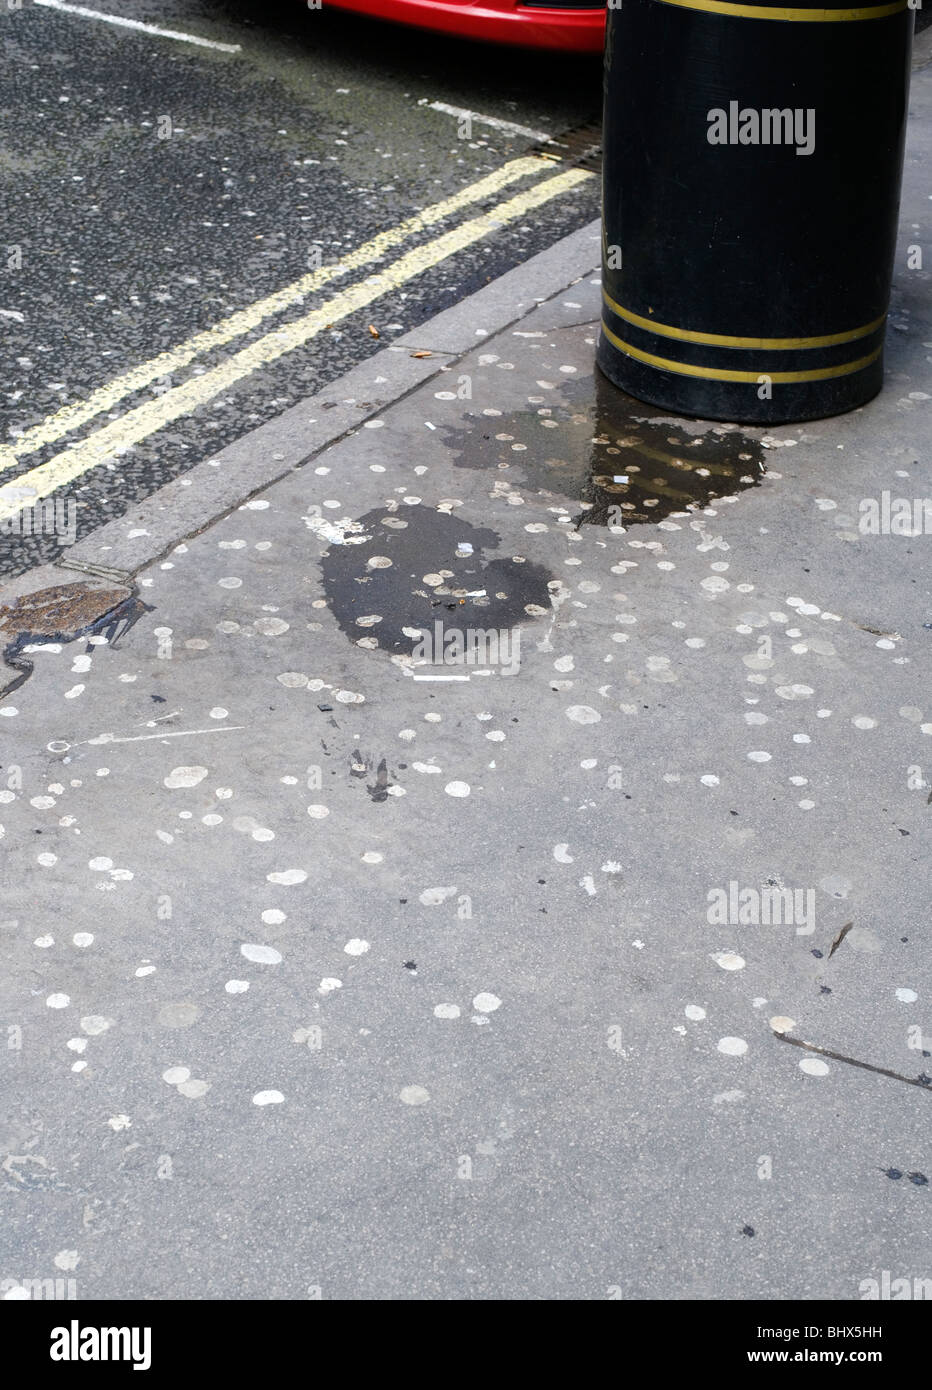 Chewing gum spat out onto pavement, London, England, UK, Europe Stock Photo